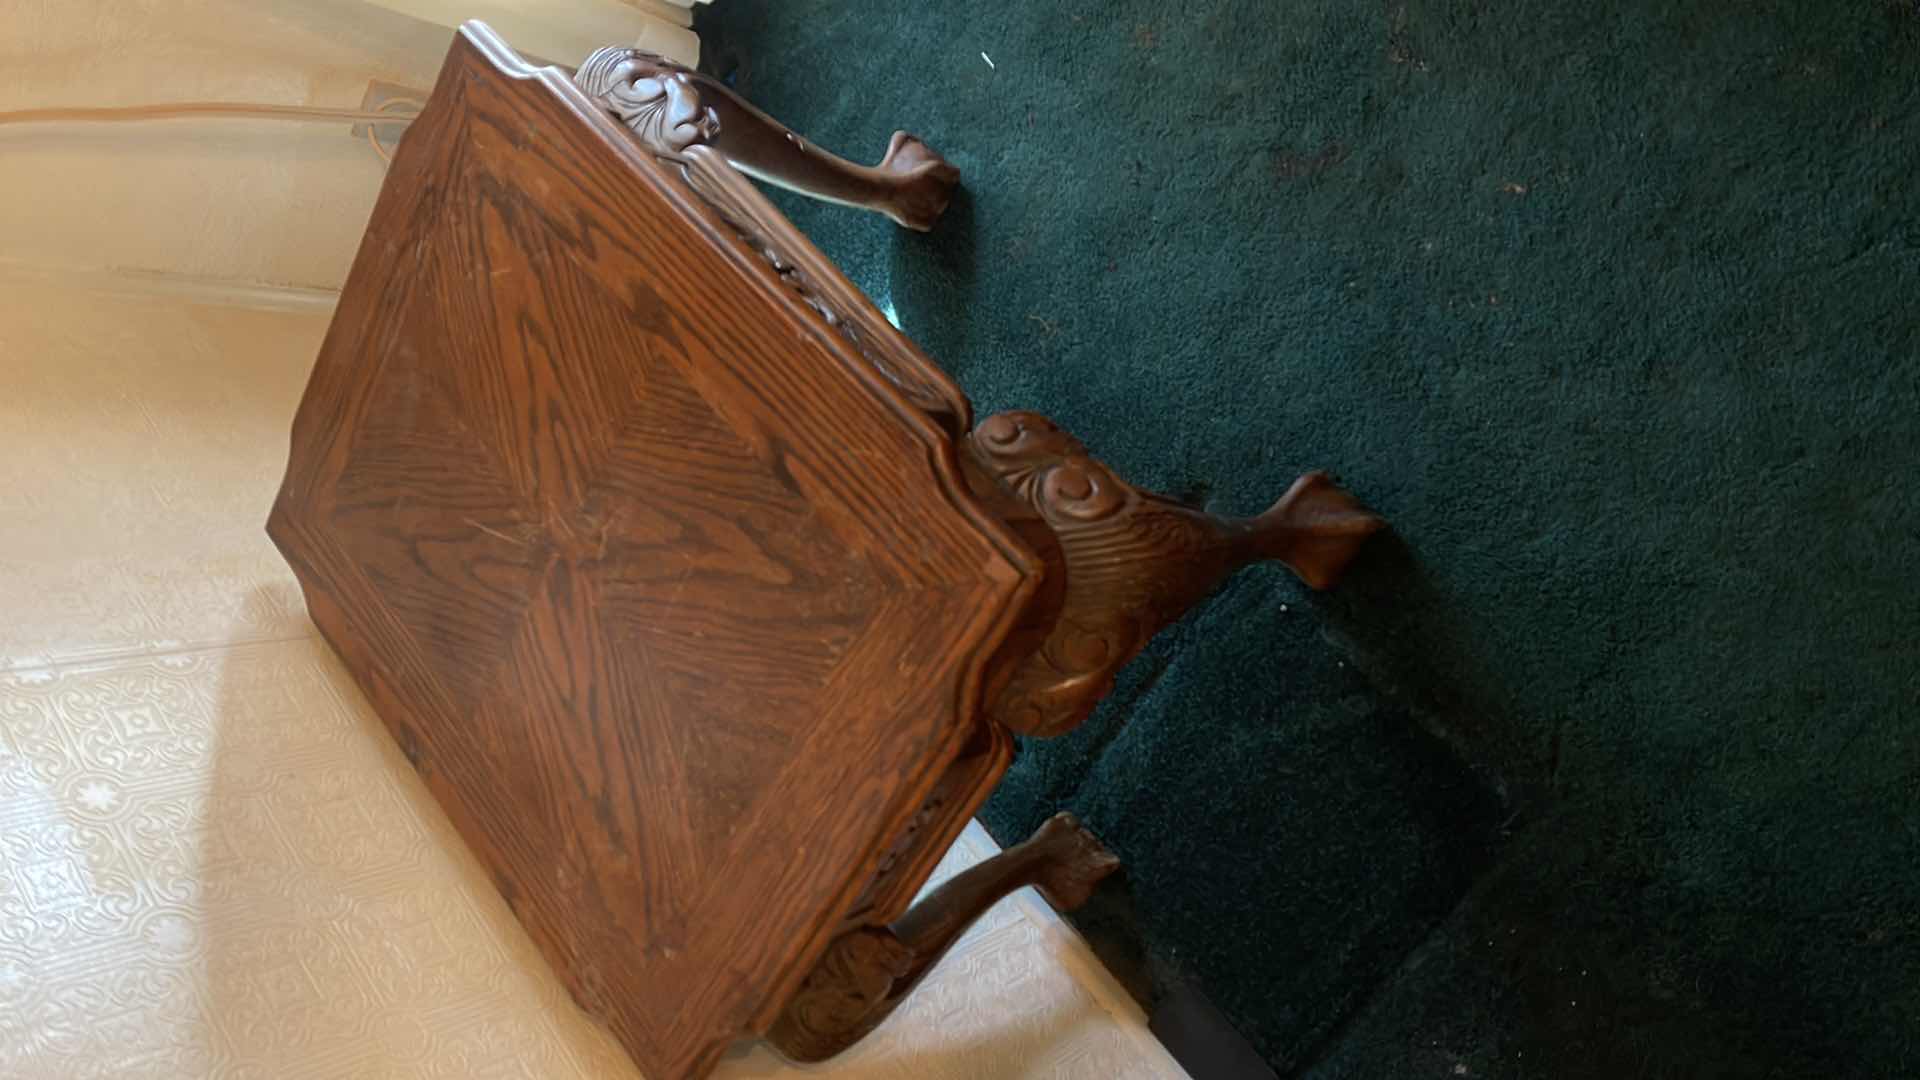 Photo 4 of VINTAGE TIGER-WOOD /OAK SIDE TABLE ORNATE WITH CLAWED FEET. 27.5”x 21”x 24”